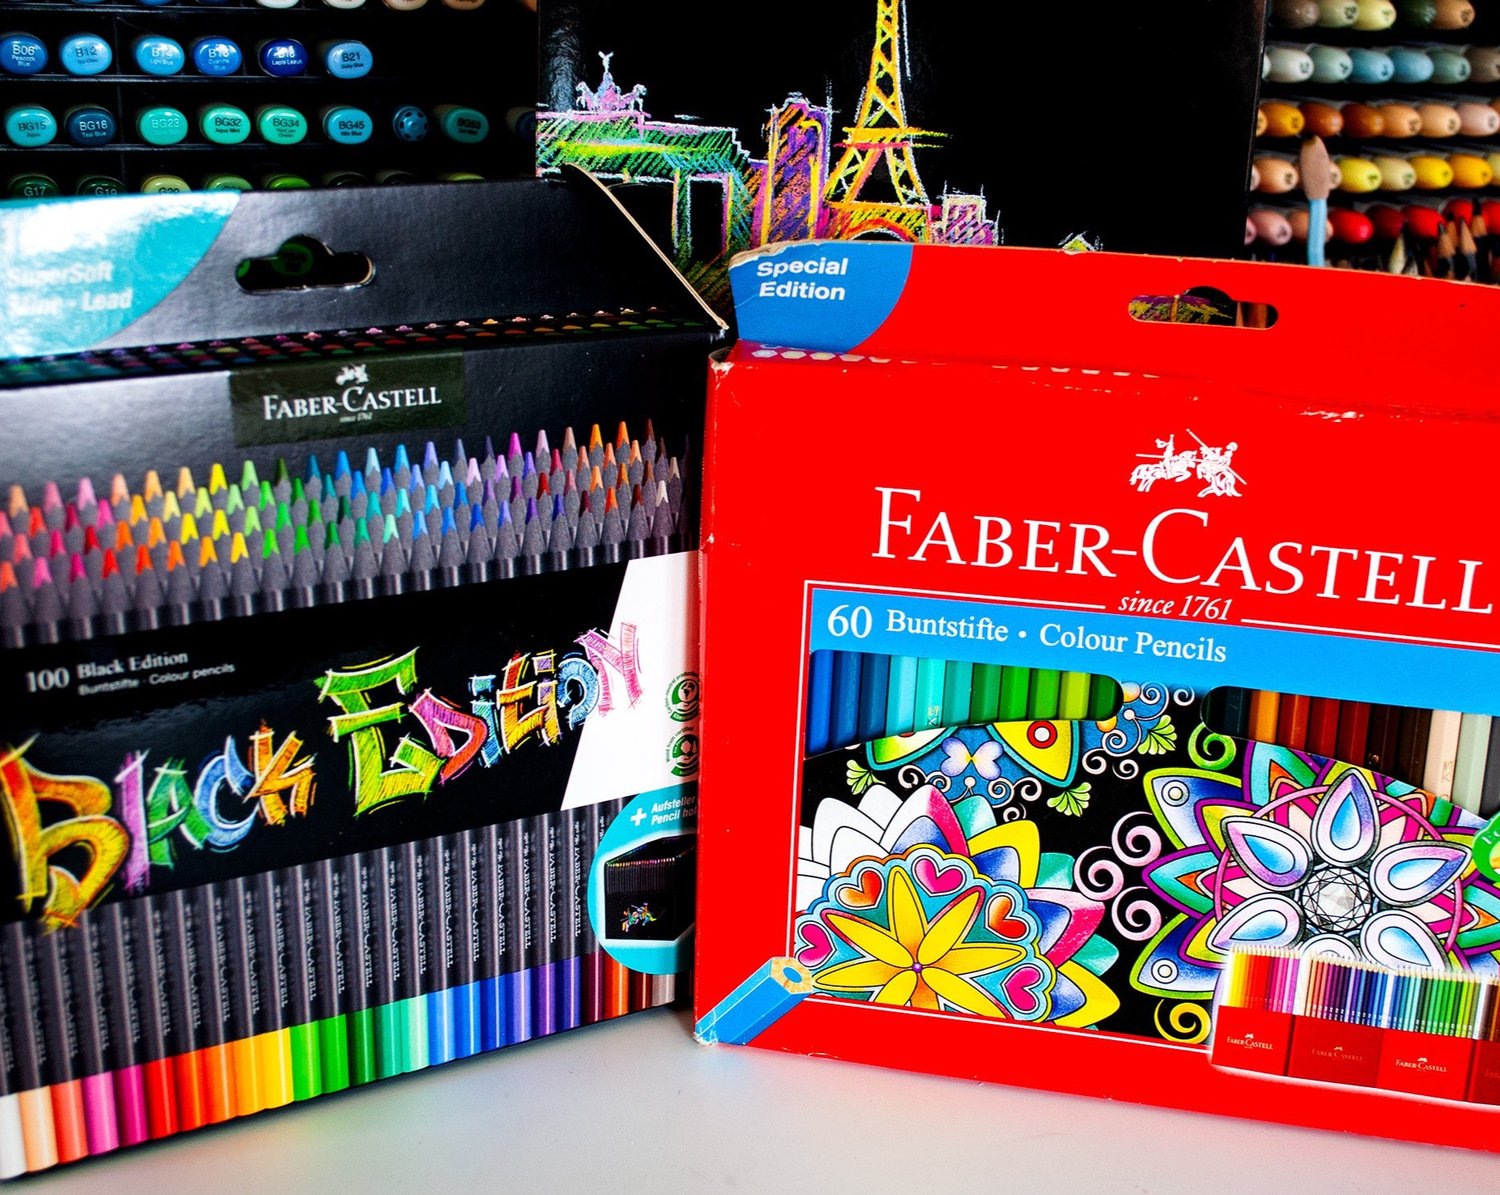 Staedtler super soft colored pencils for dark paper-are they better than  Faber Castell Black Edition 